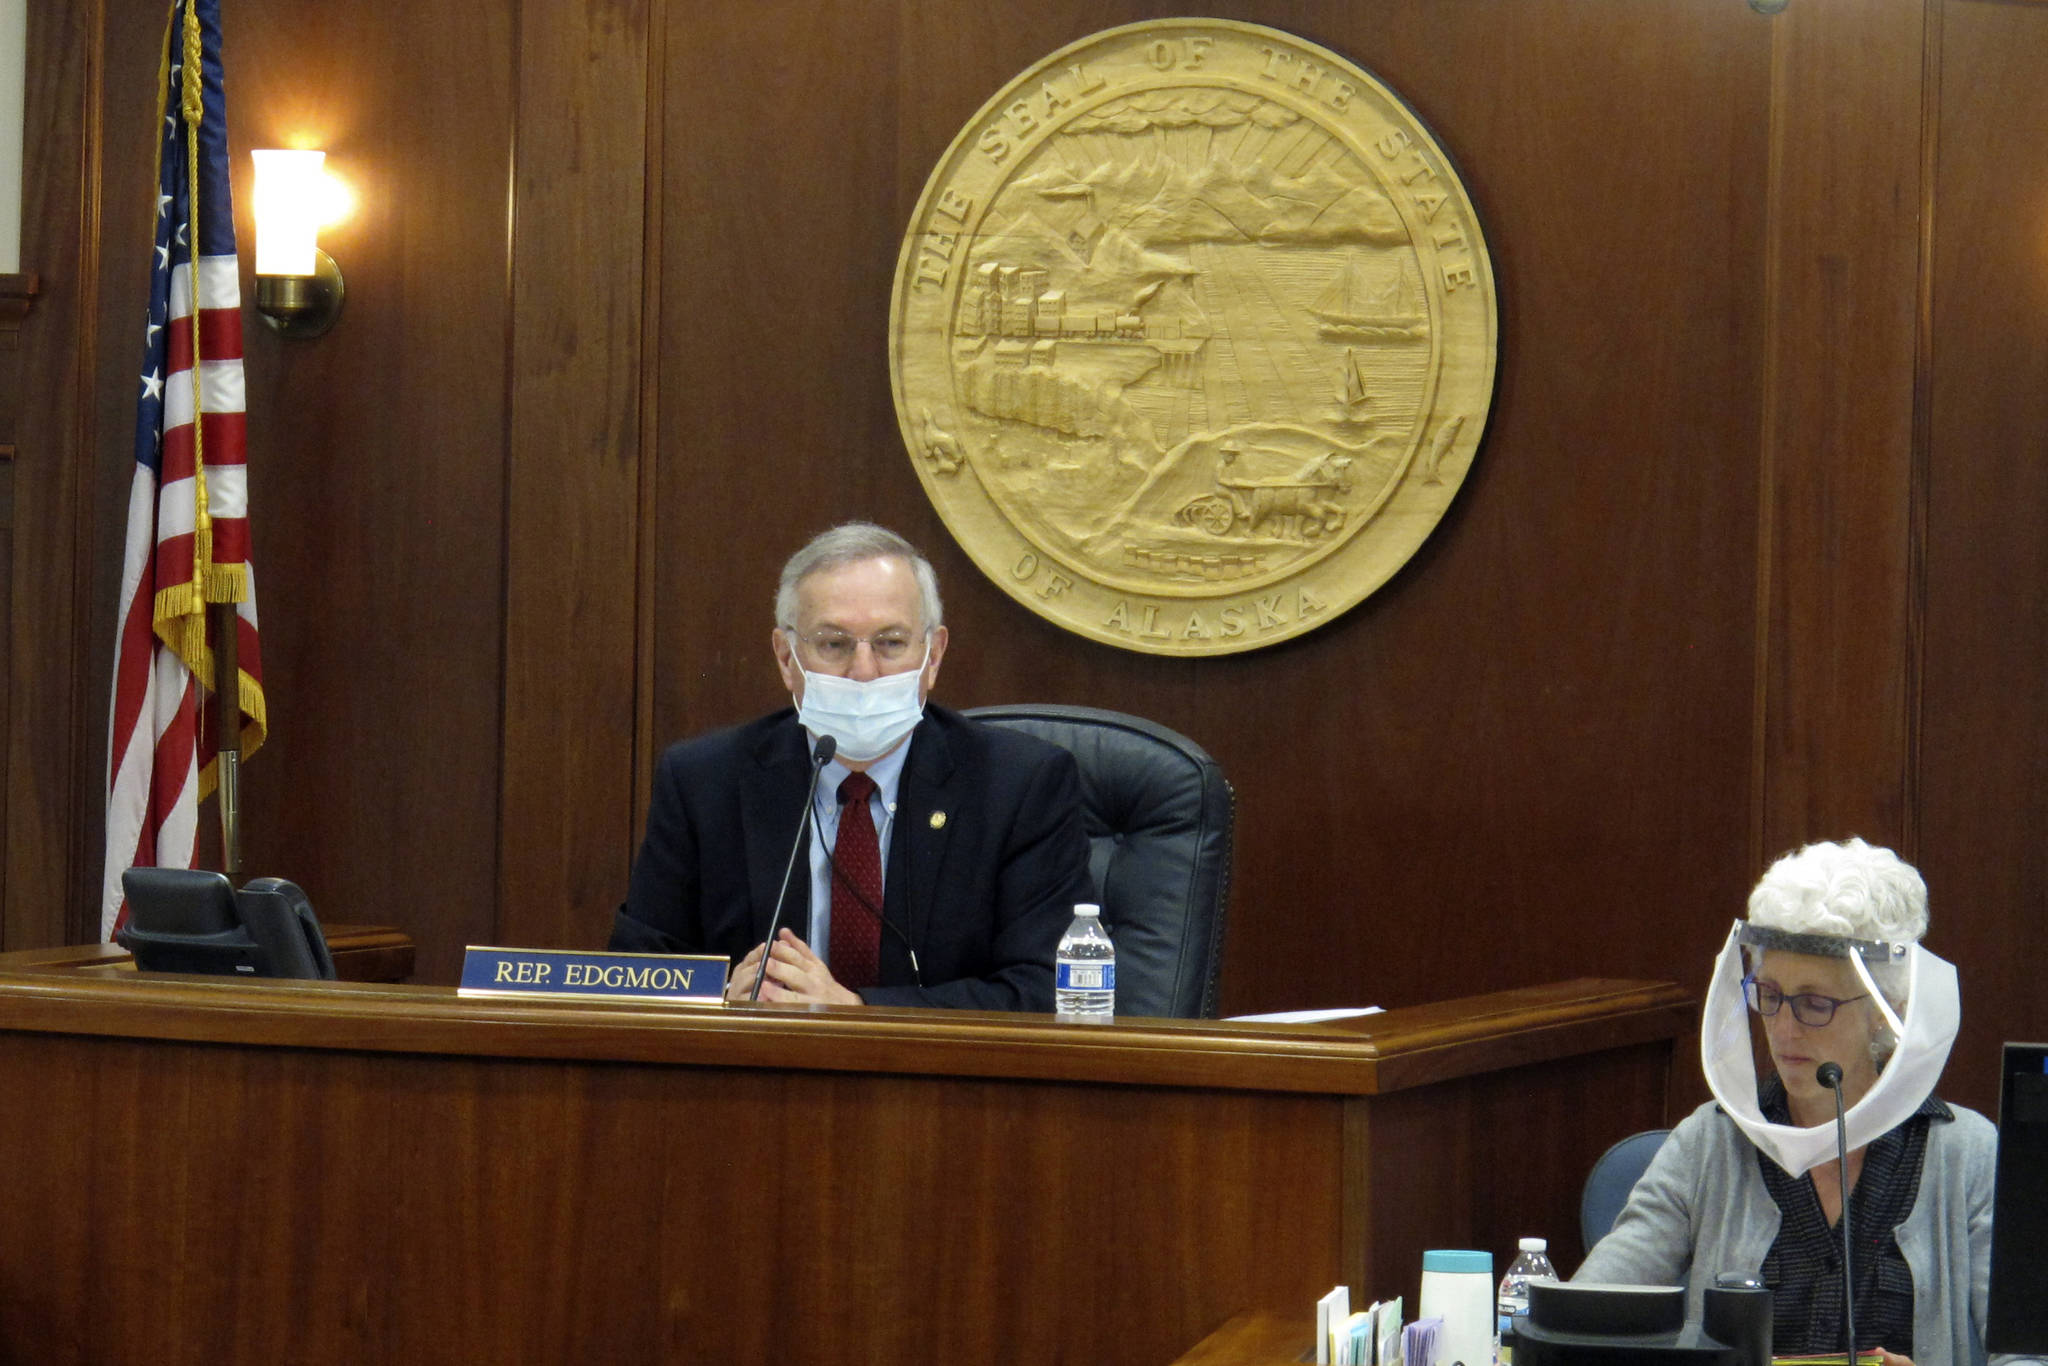 In this May 19, 2020, file photo, Alaska House Speaker Bryce Edgmon, left, presides over the House floor in Juneau, Alaska. Alaska lawmakers who each year relocate to a capital city accessible only by plane or boat are facing challenges in getting settled ahead of what is expected to be a difficult legislative session overshadowed by COVID-19. Speaker Edgmon, an independent from Dillingham, about 860 miles from Juneau, said pandemic concerns come at a time when lawmakers will need to make tough budget decisions. (AP Photo/Becky Bohrer, File)